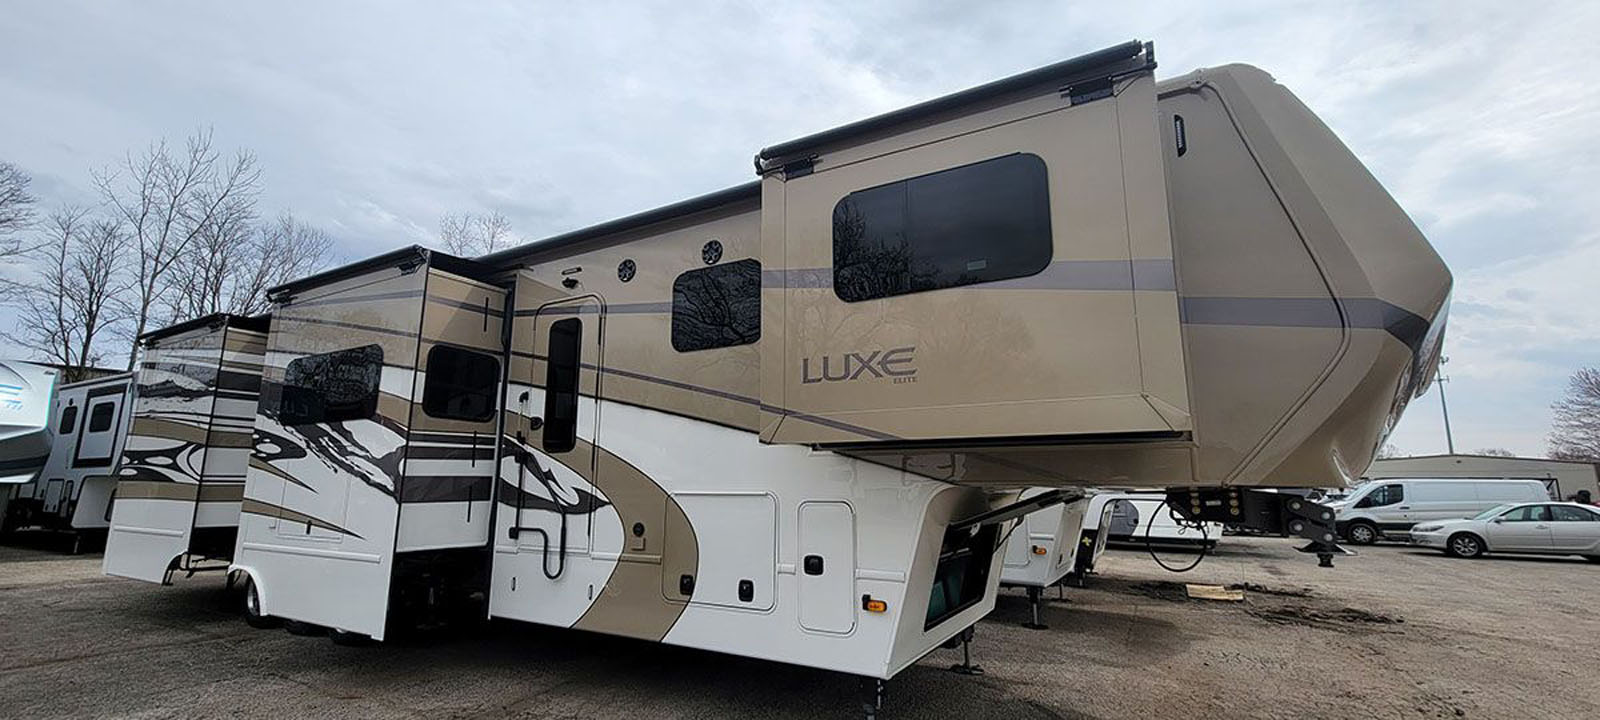 PENDING 2023 Luxe Elite 44FL Call for Show Model Price 10423 Luxe